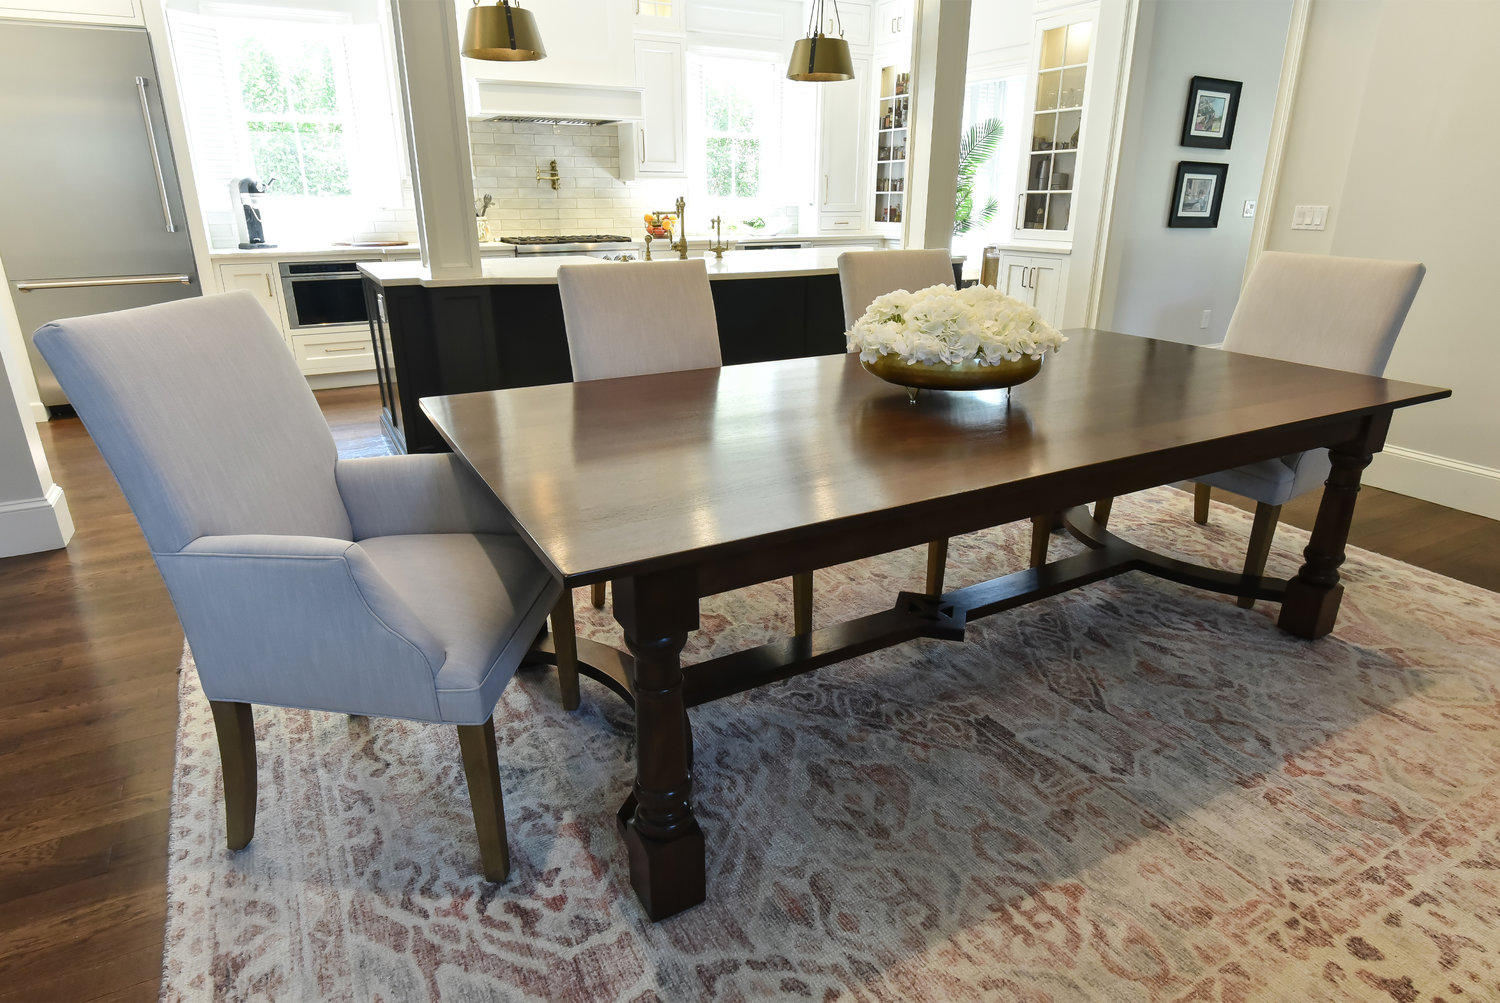 The walnut dining table was a design collaboration between Inside Style, their clients, and Matt Johnson, artisan/craftsman